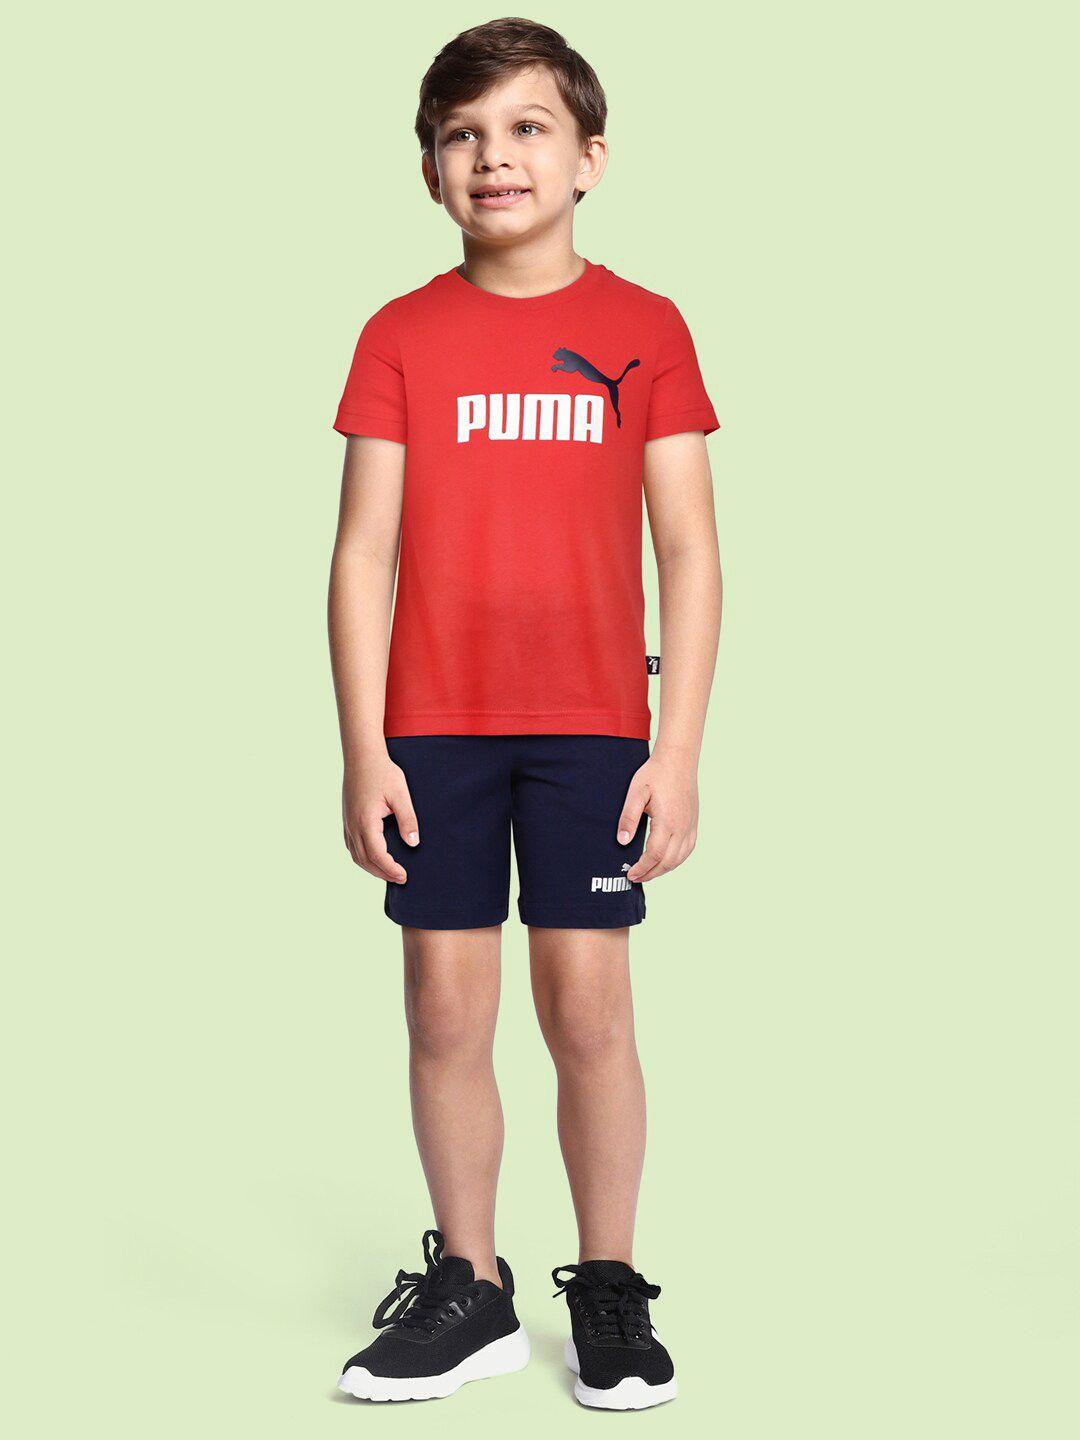 puma boys red & navy blue brand logo print knitted jersey youth t-shirt with shorts